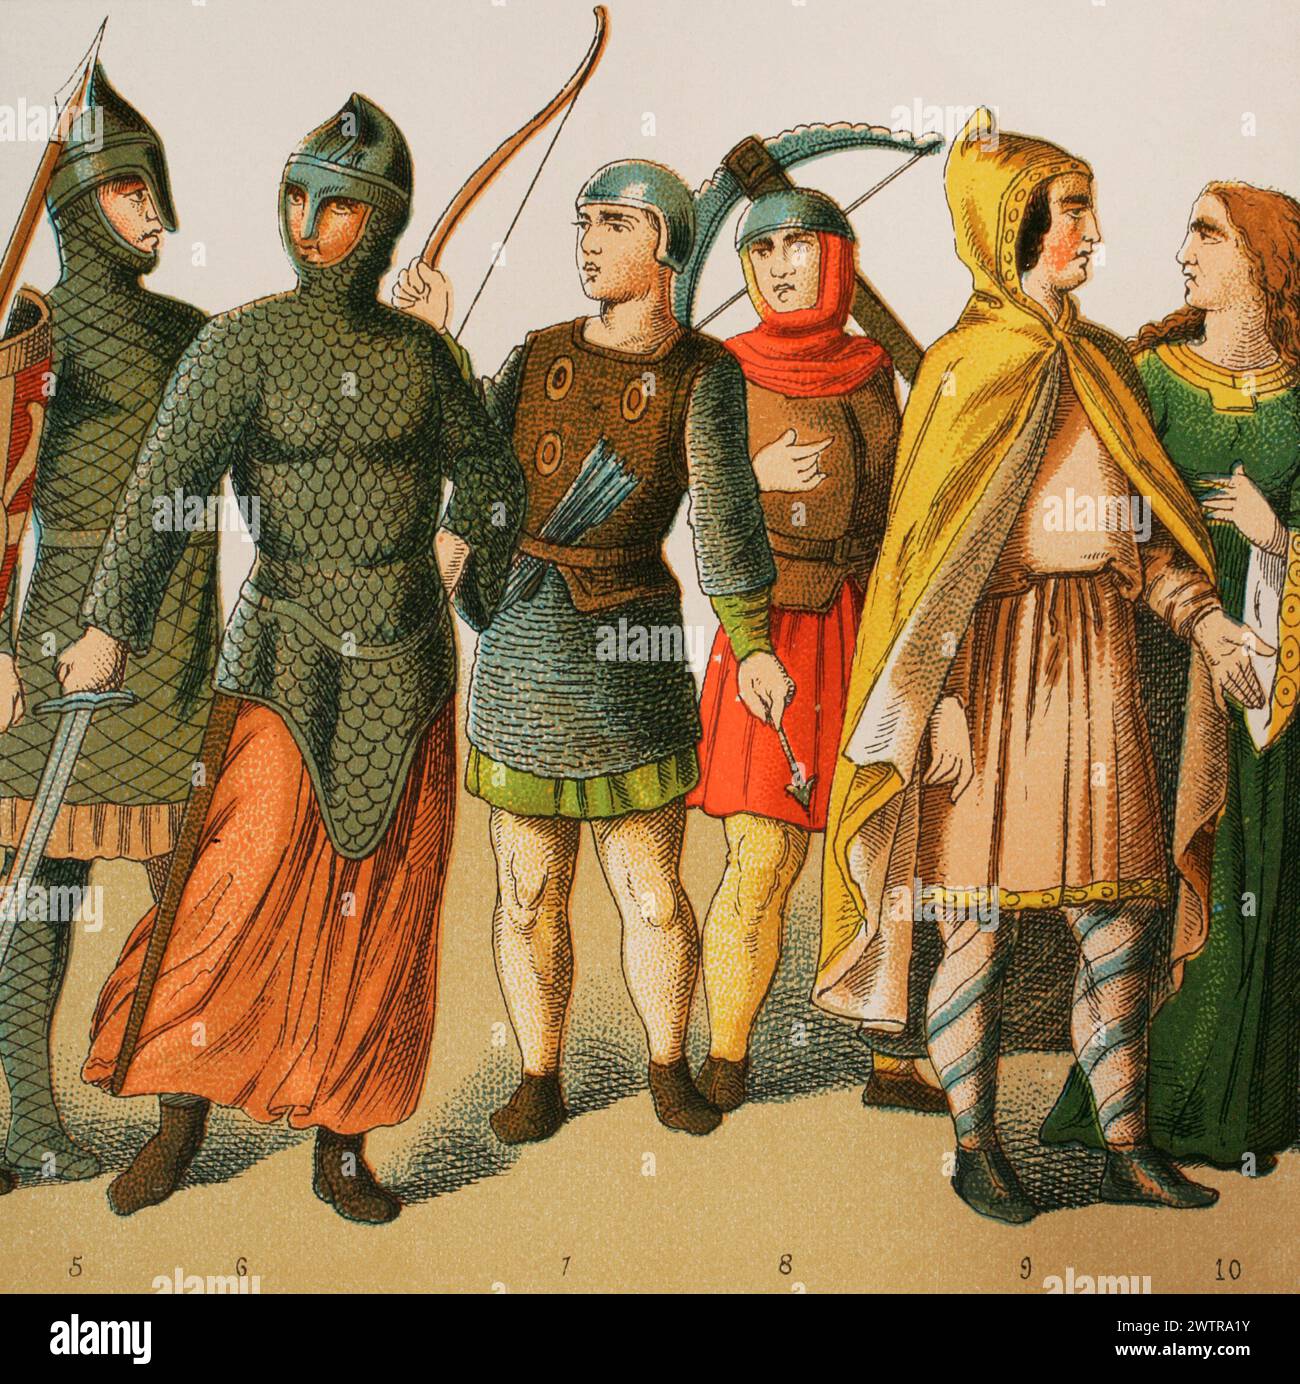 Normans, 1000-1100. From left to right: 5-6-7-8: warriors, 9: nobleman, 10: noble lady. Chromolithography. 'Historia Universal', by César Cantú. Volume V, 1884. Stock Photo